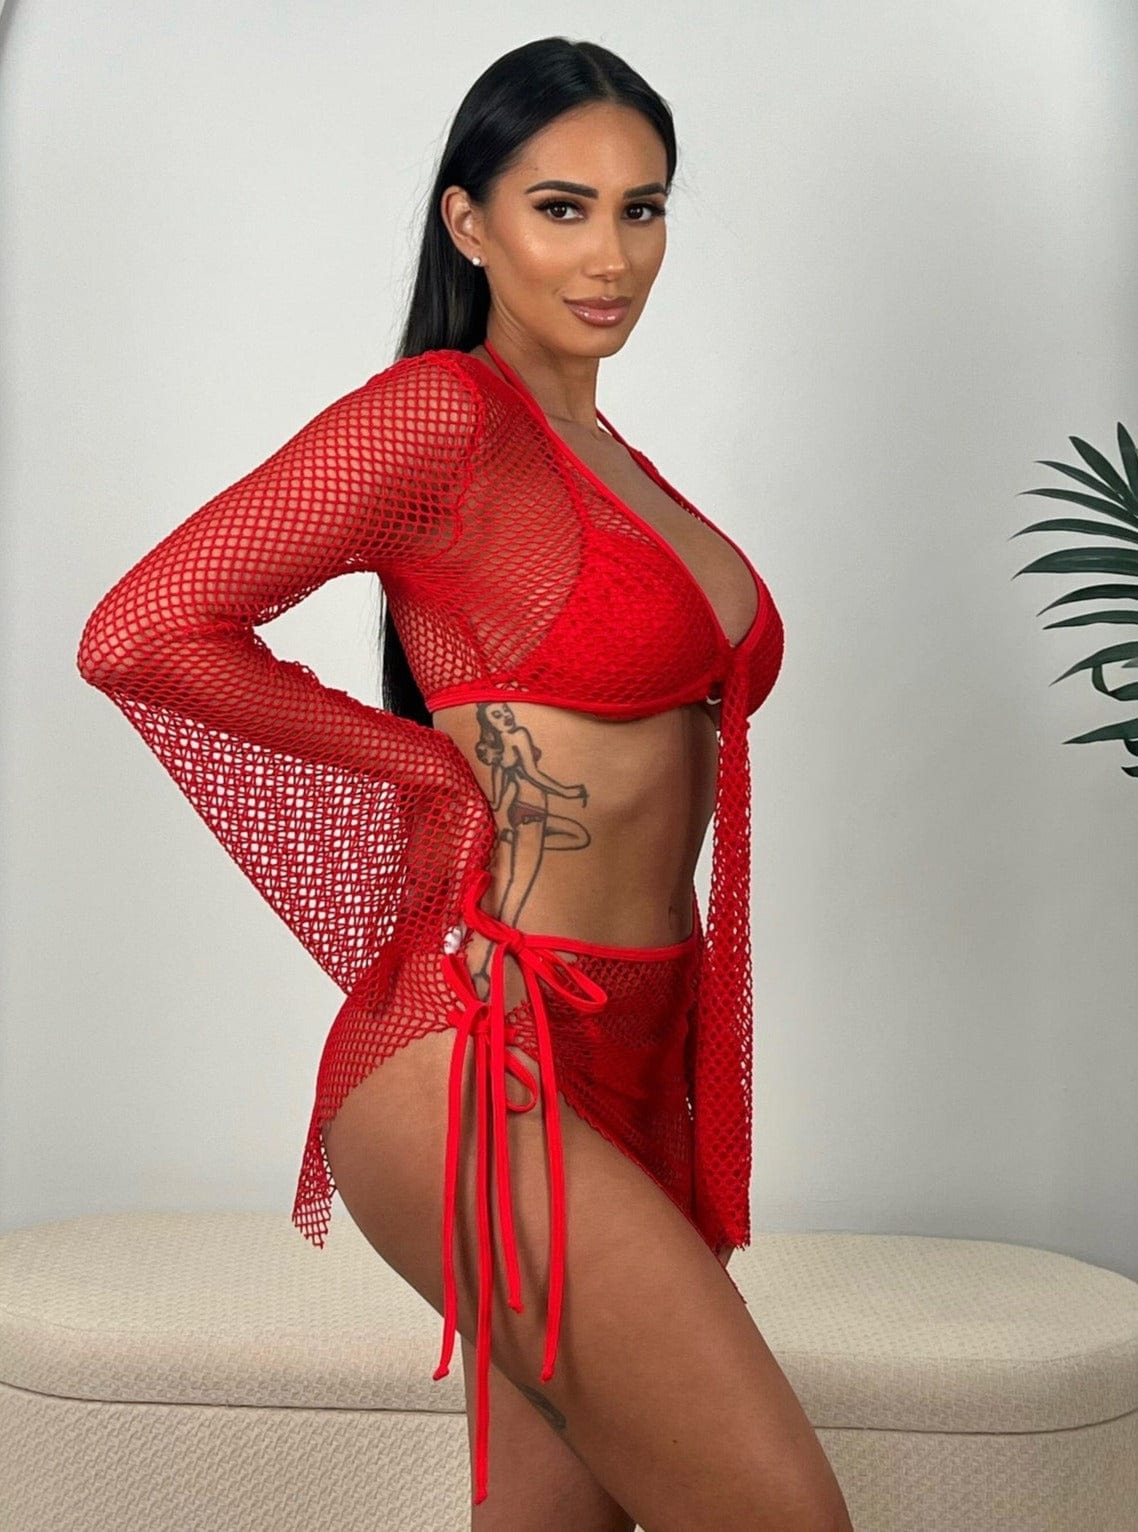 Berry Beachy Swimwear Apparel & Accessories > Clothing > Skirts Red / Extra Small 2 Pc. Black Tulum Mesh Net Tie Front Top & Skirt Beach Cover-Up Set 2023 Sexy Black Tulum Fishnet Skirt Top Berry Beachy Swimwear Set